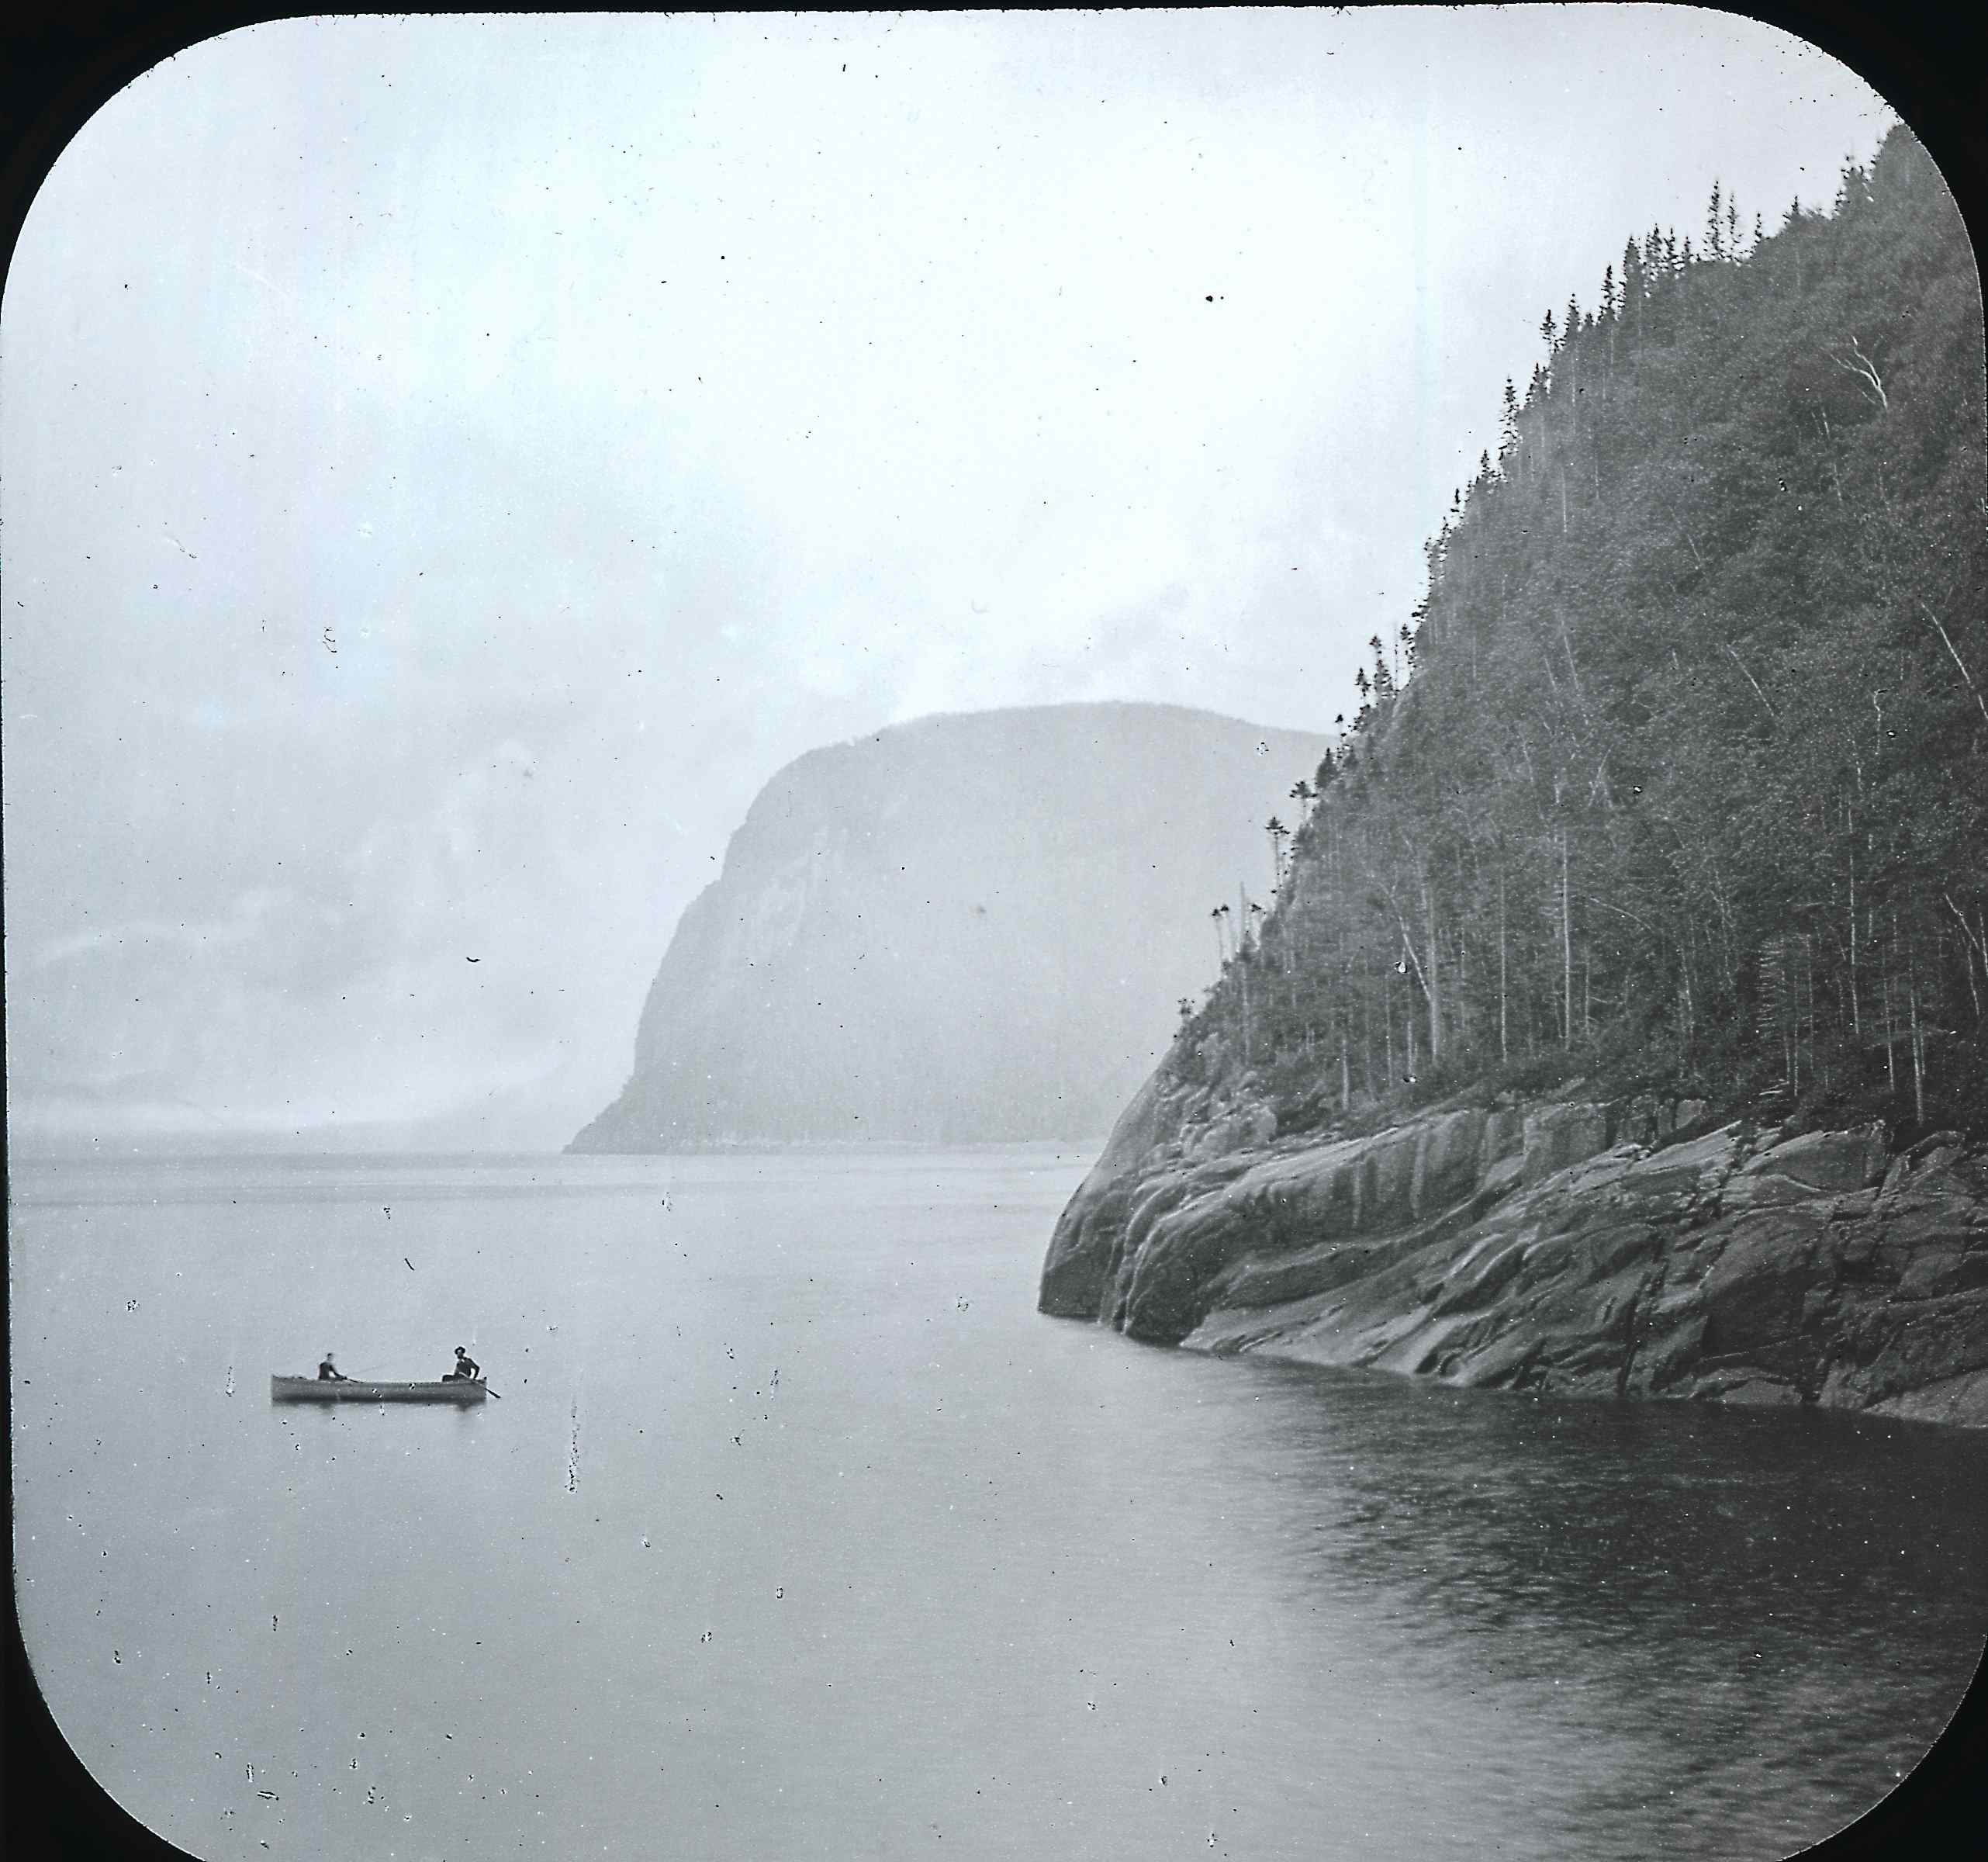 Two canoers fishingat the foot of a cliff that plunges into a very wide river.